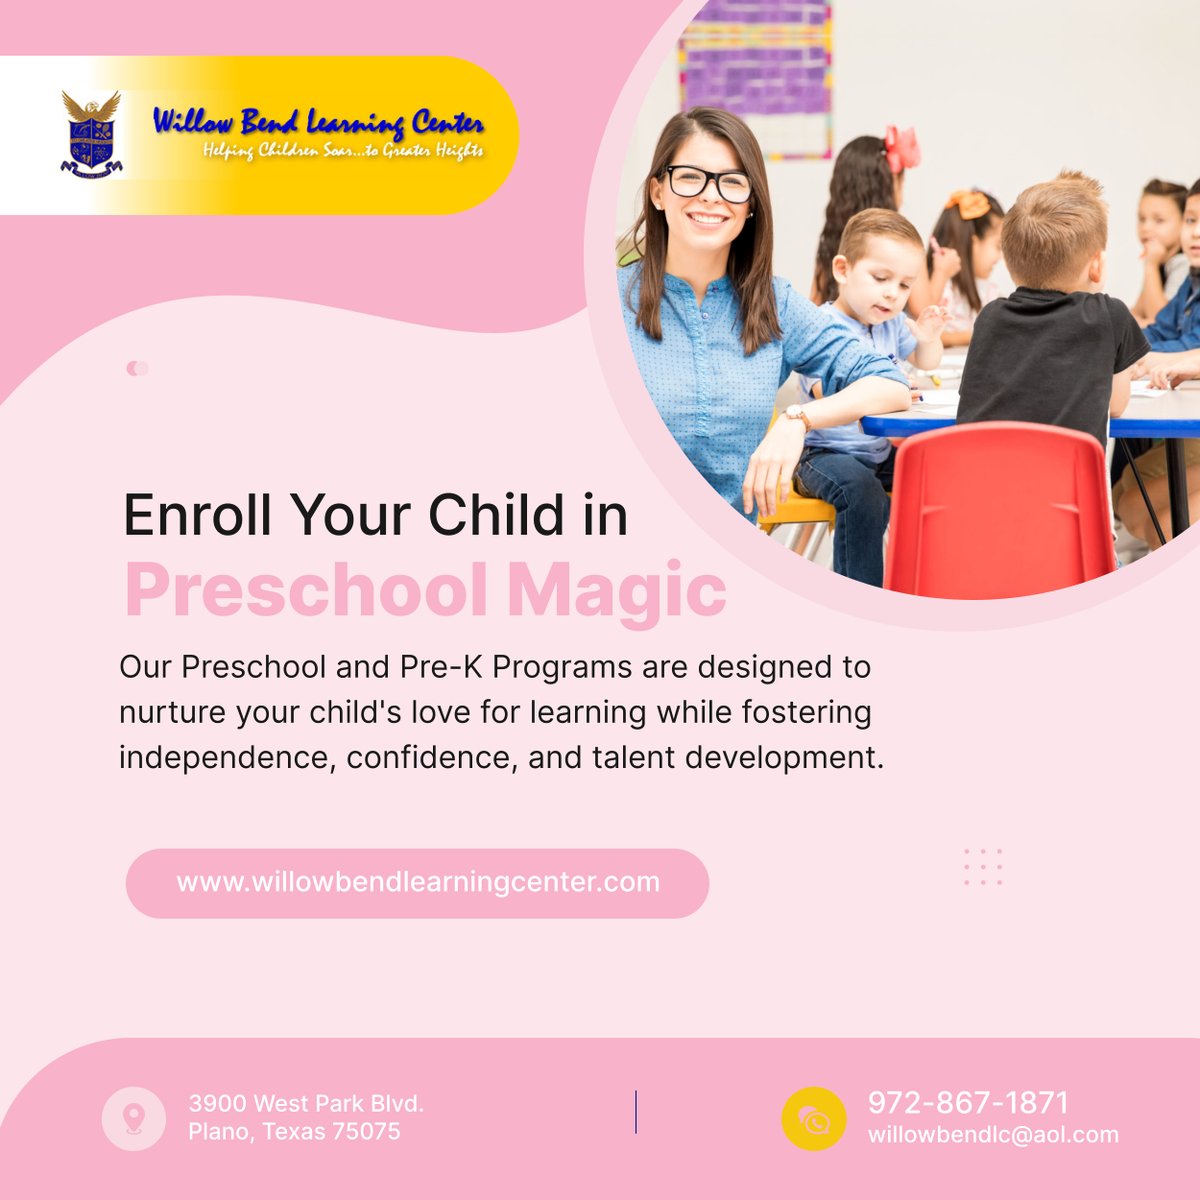 Unlock the magic of learning with Willow Bend Learning Center's Preschool and Pre-K Programs, where every day is filled with discovery, creativity, and joy.

#WillowBendLearningCenter #ChildDevelopment #Preschool #EarlyEducation #PlanoTX